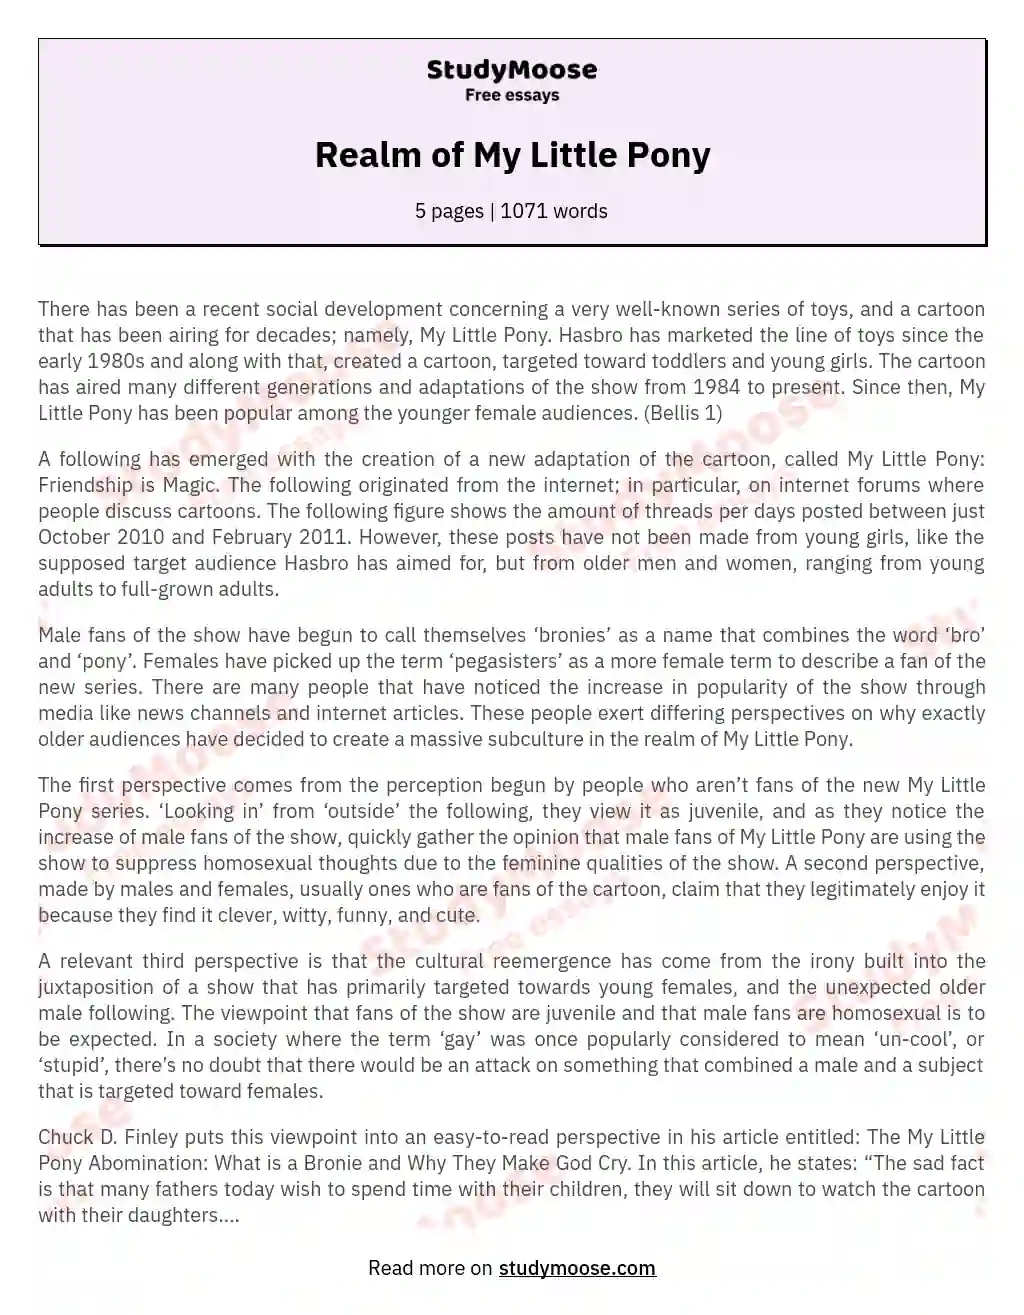 Realm of My Little Pony Free Essay Example